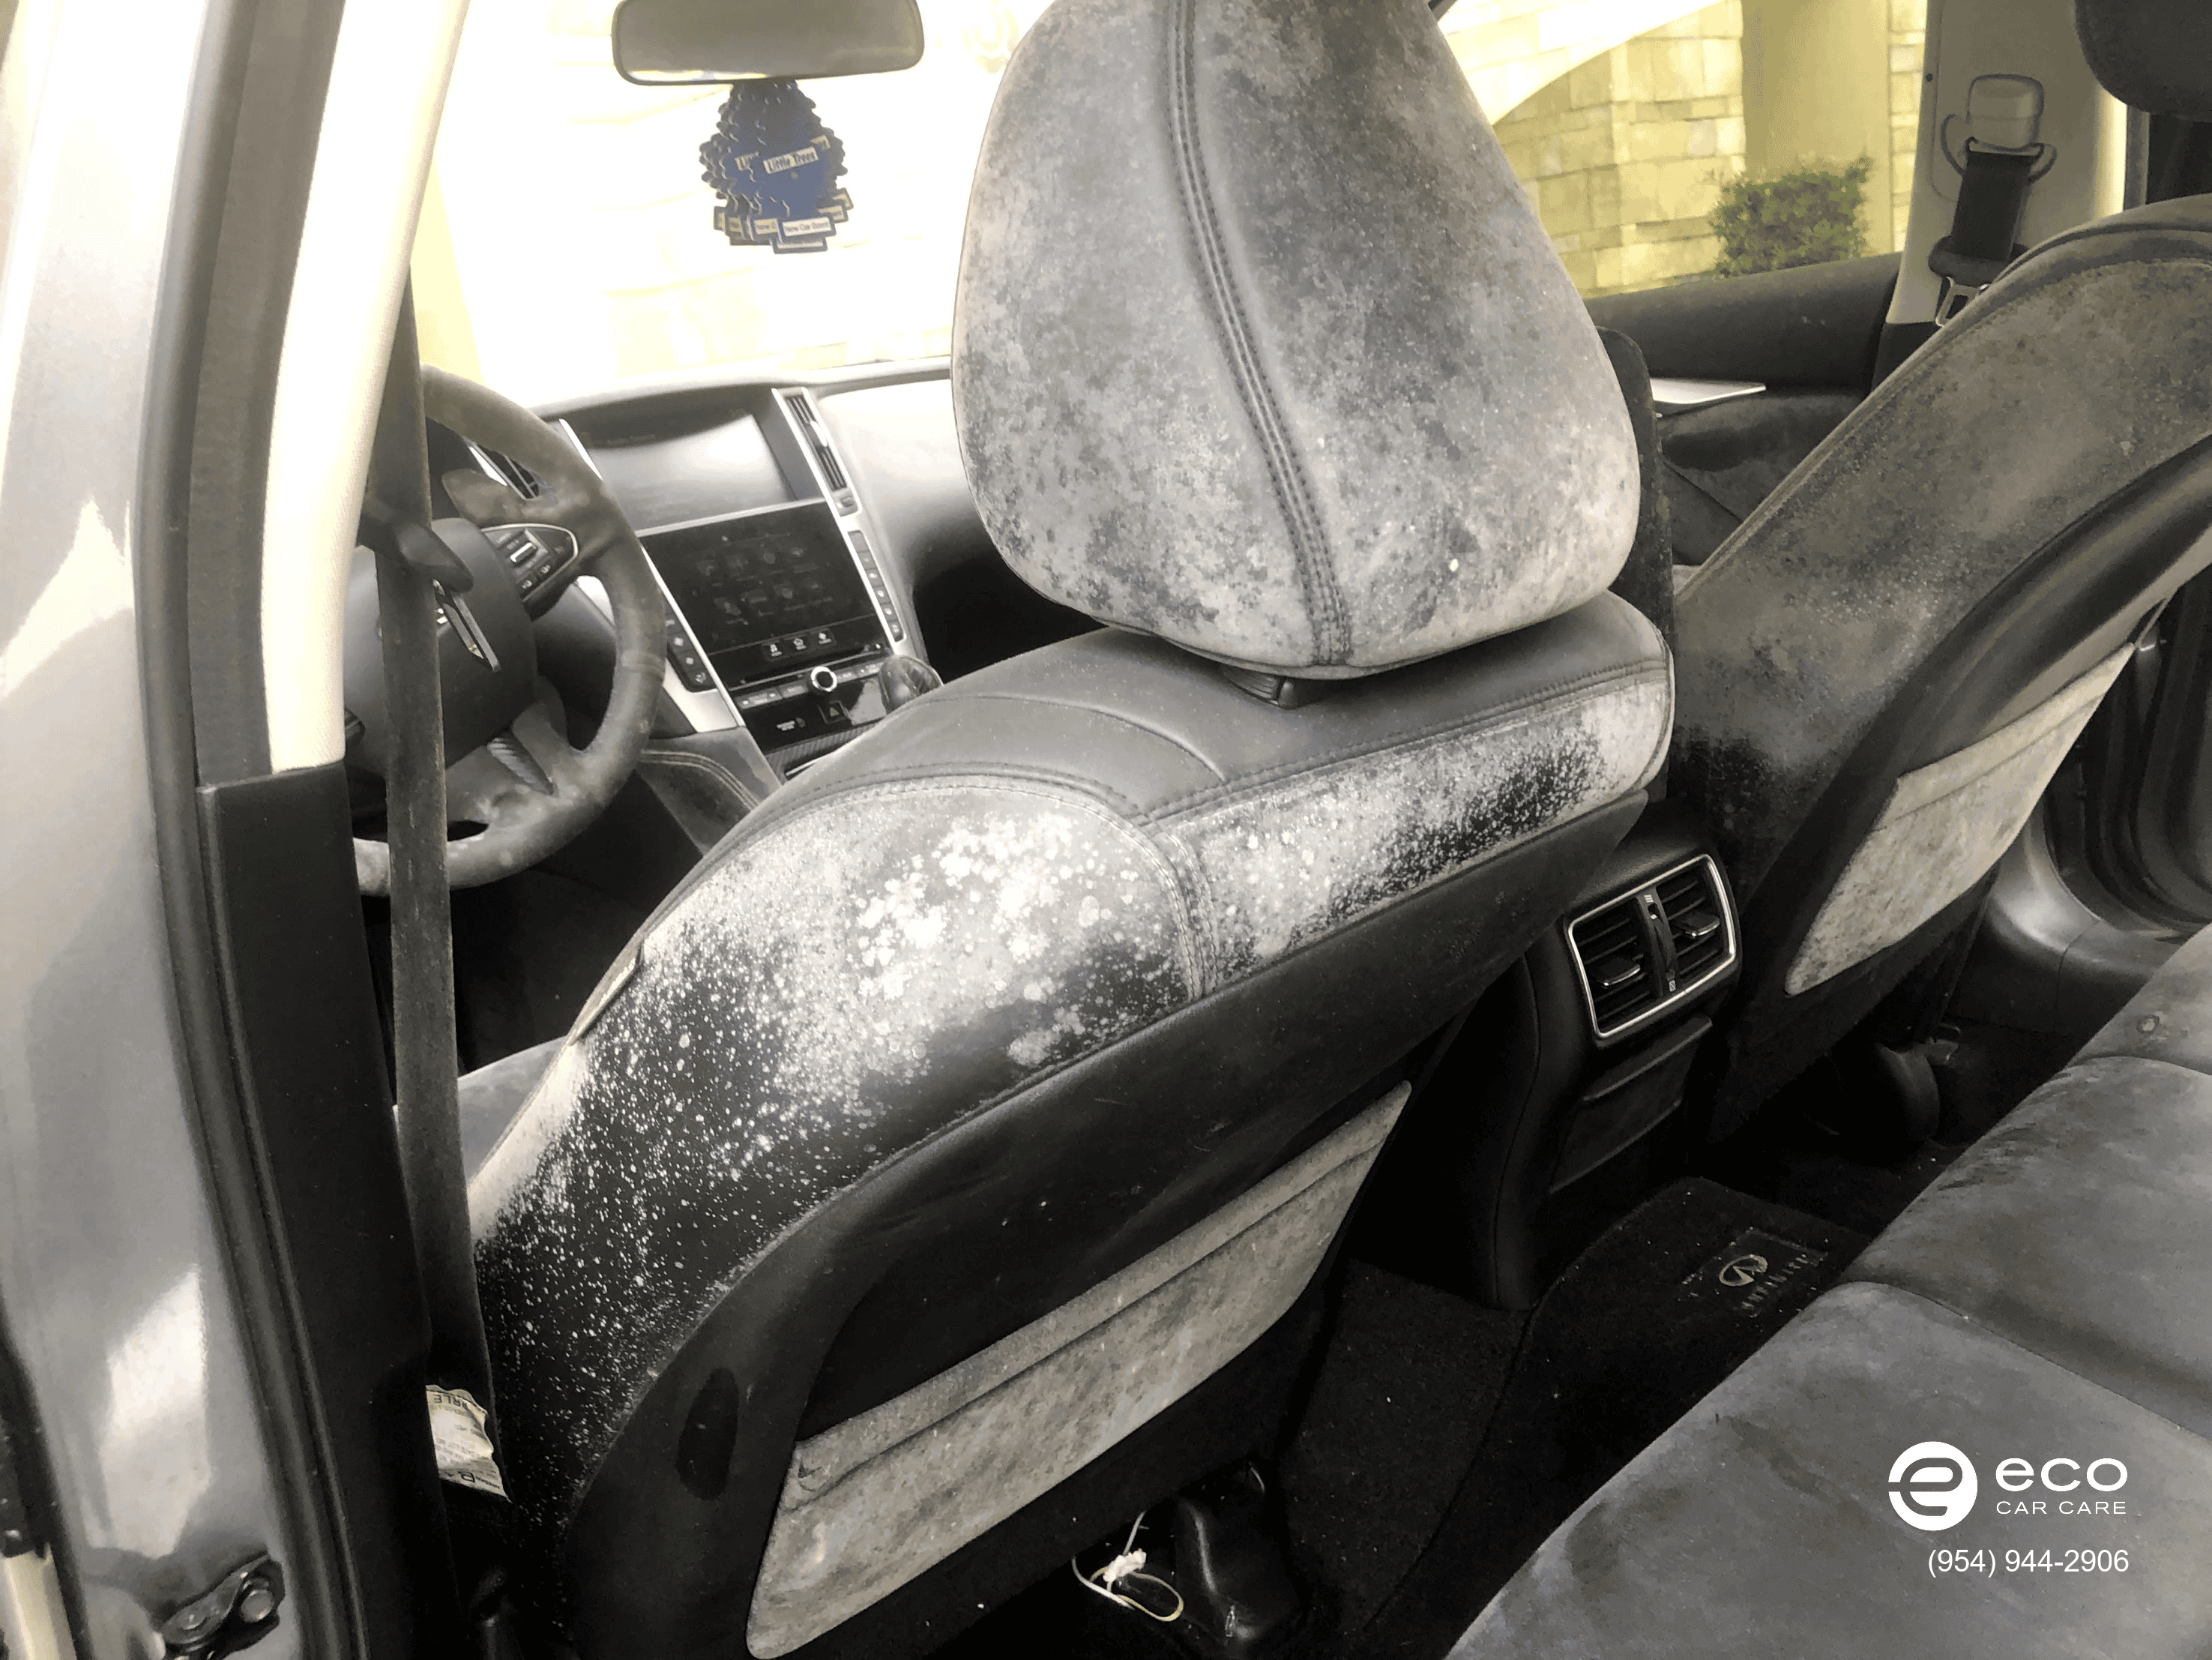 car mold removal and remediation photo collection